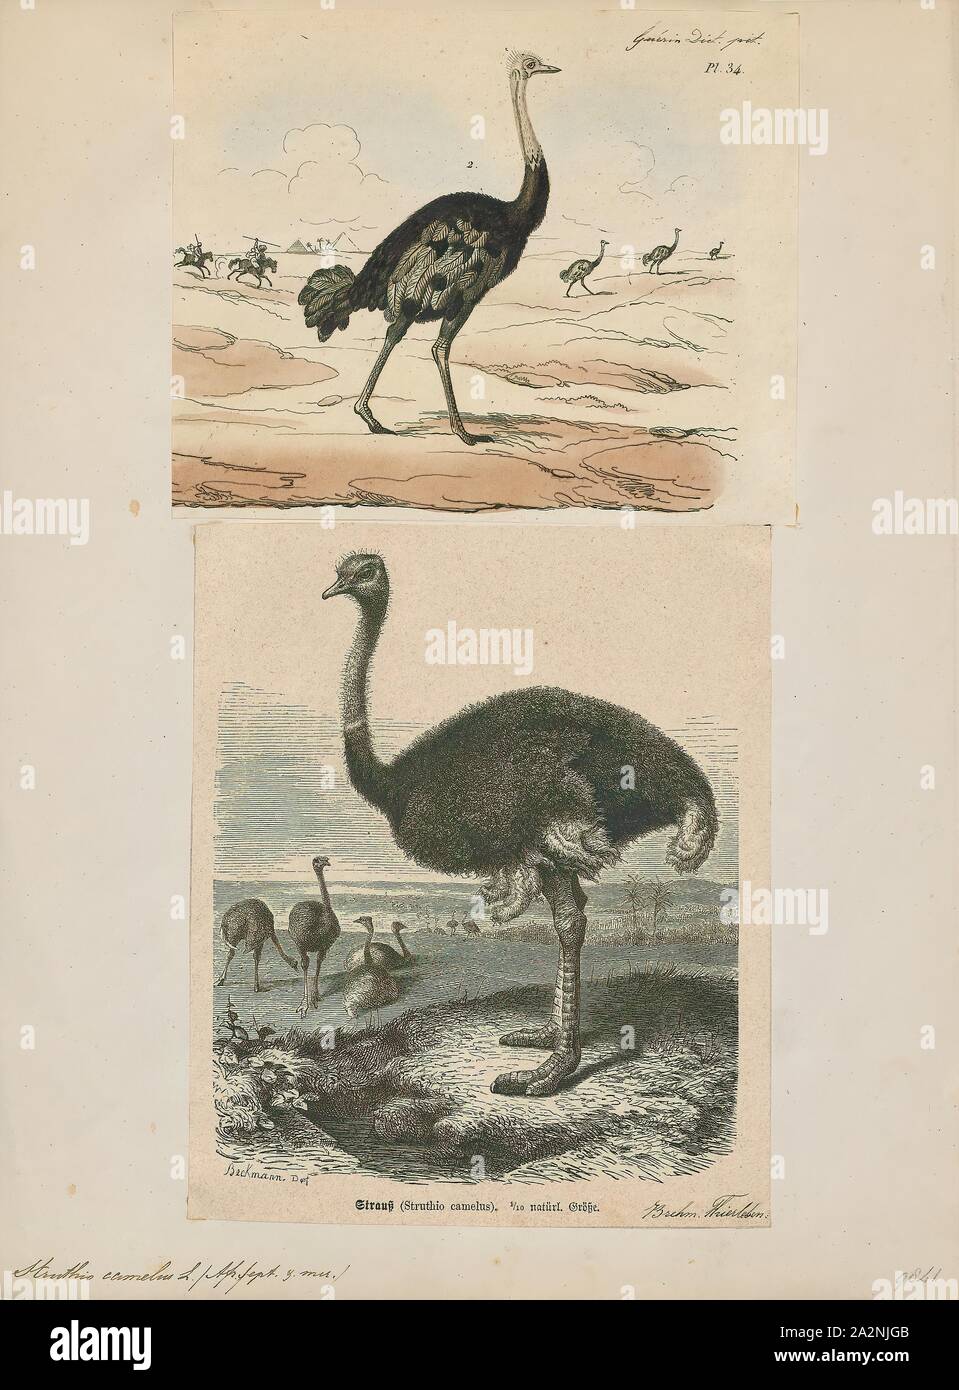 Struthio camelus, Print, The common ostrich (Struthio camelus), or simply ostrich, is a species of large flightless bird native to certain large areas of Africa. It is one of two extant species of ostriches, the only living members of the genus Struthio in the ratite order of birds. The other is the Somali ostrich (Struthio molybdophanes), which was recognized as a distinct species by BirdLife International in 2014 having been previously considered a very distinctive subspecies of ostrich., 1700-1880 Stock Photo